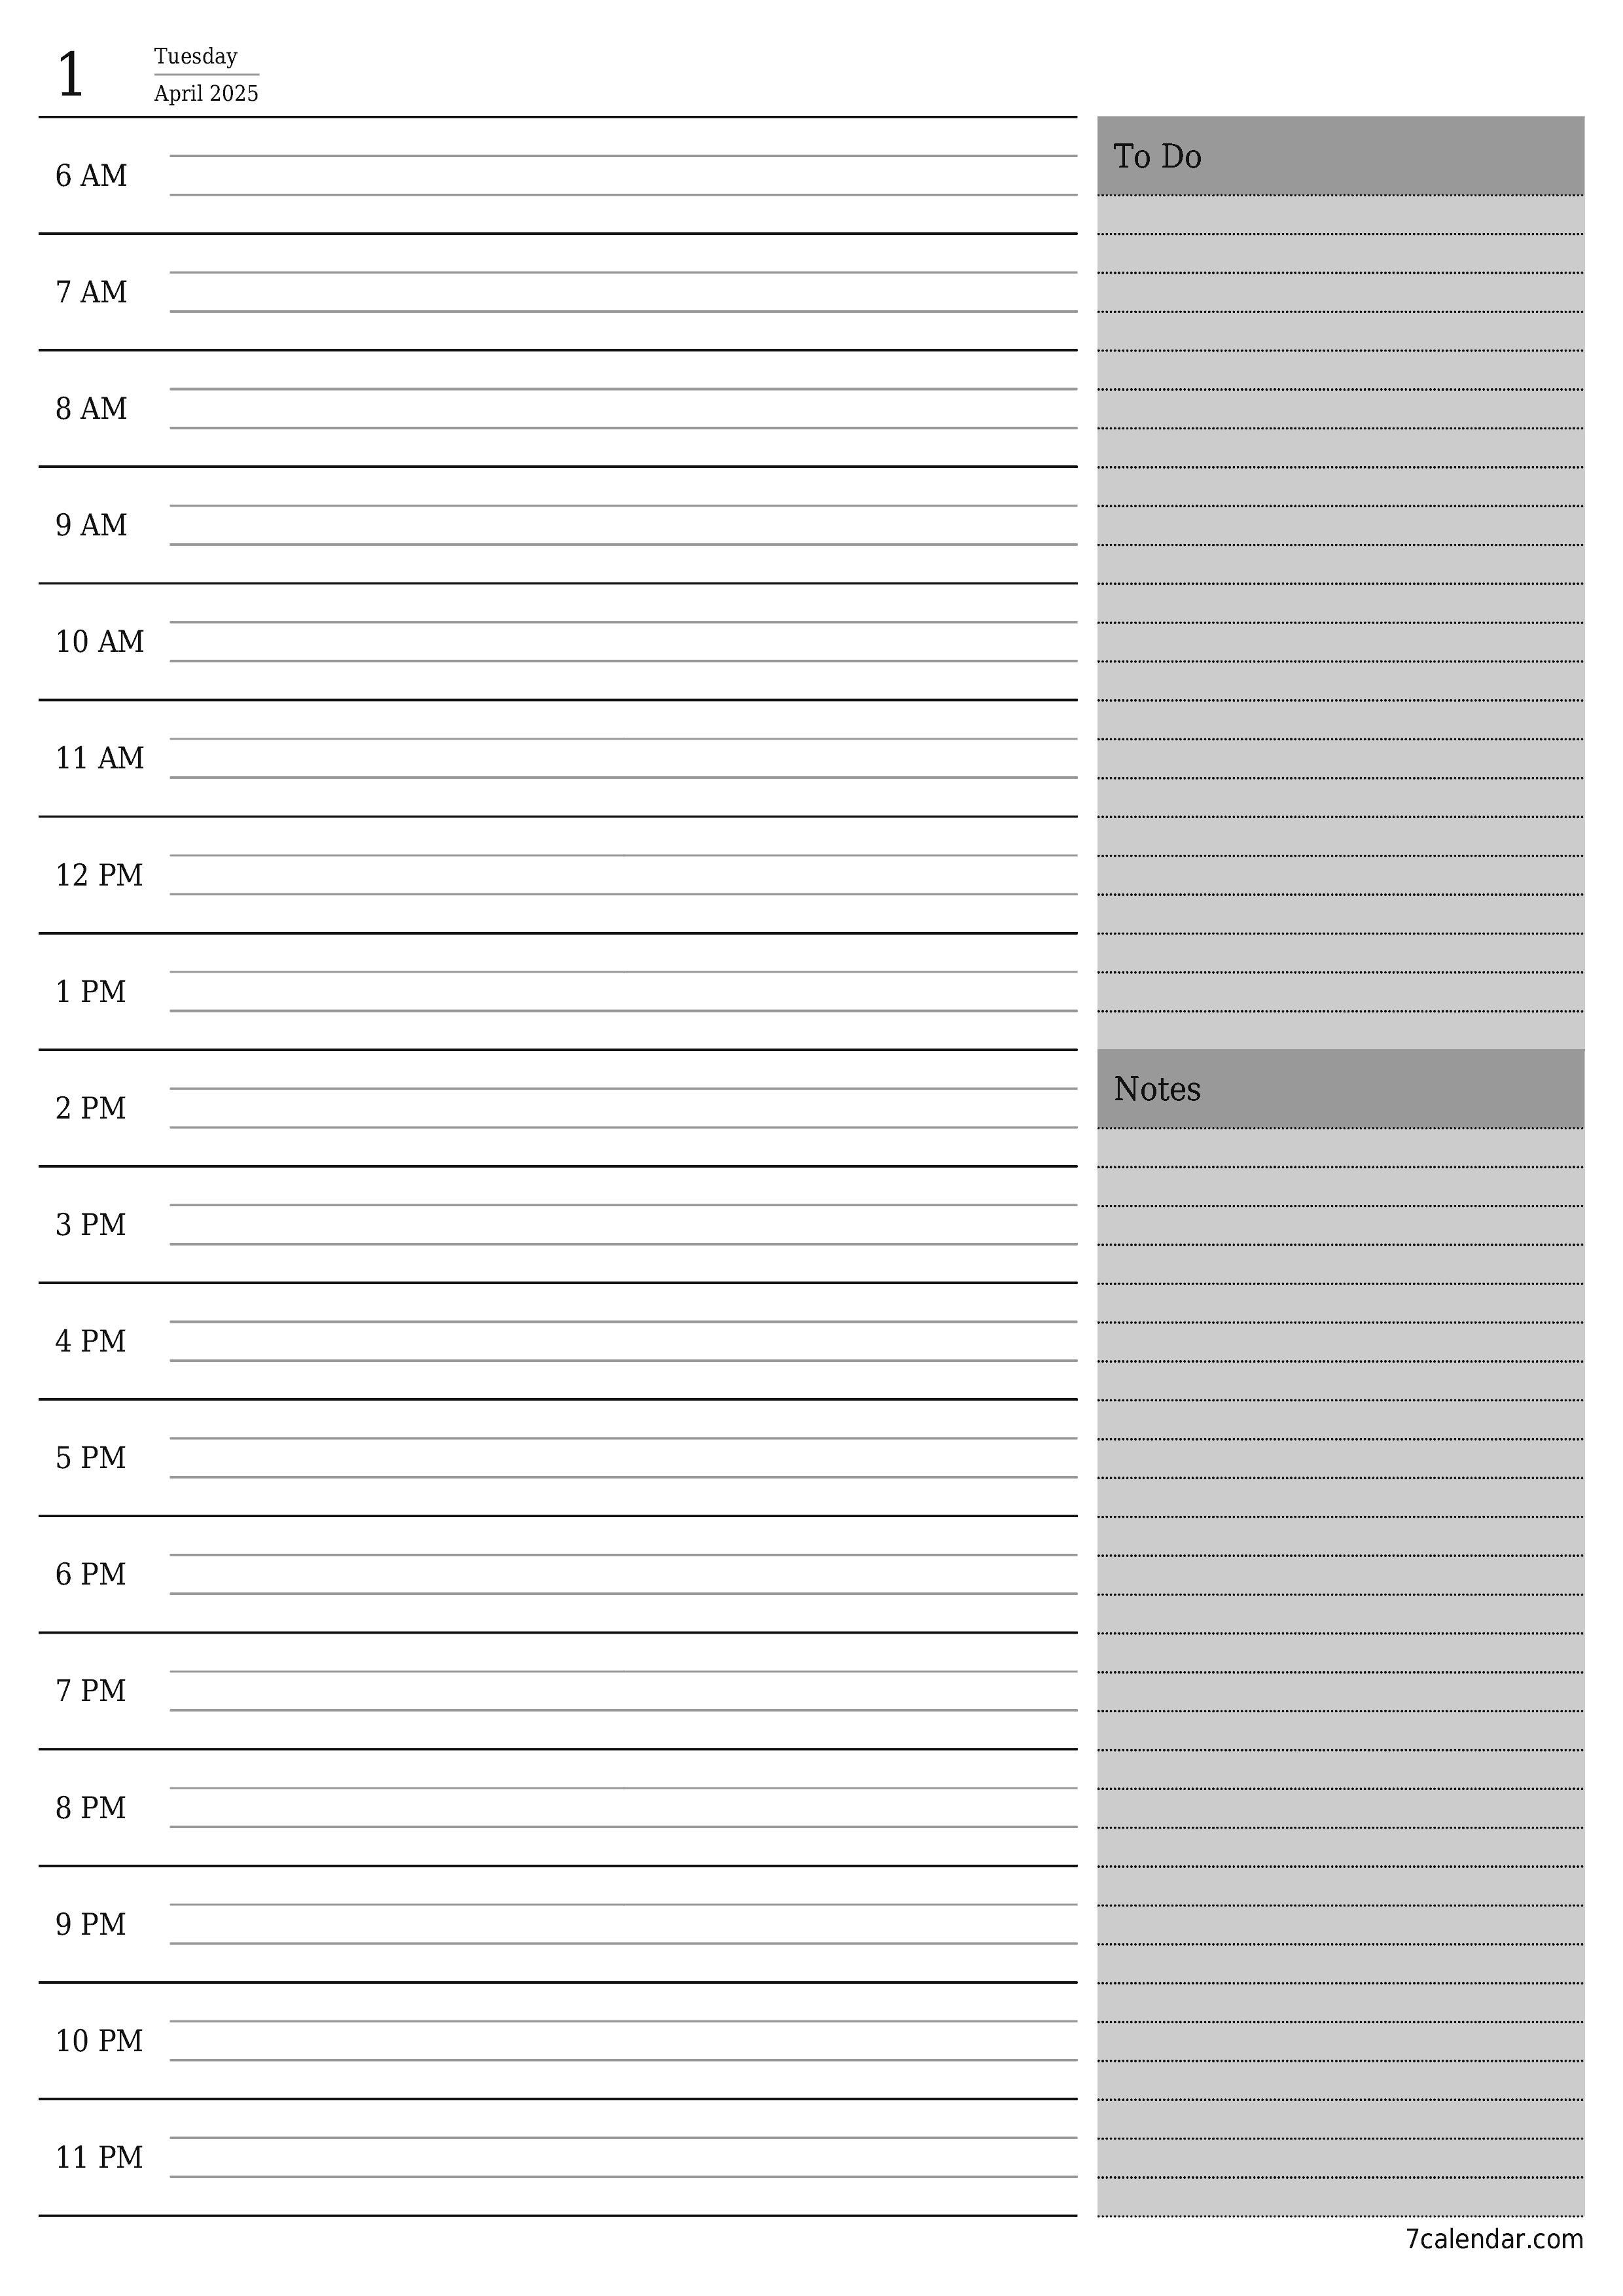 Blank daily printable calendar and planner for day April 2025 with notes, save and print to PDF PNG English